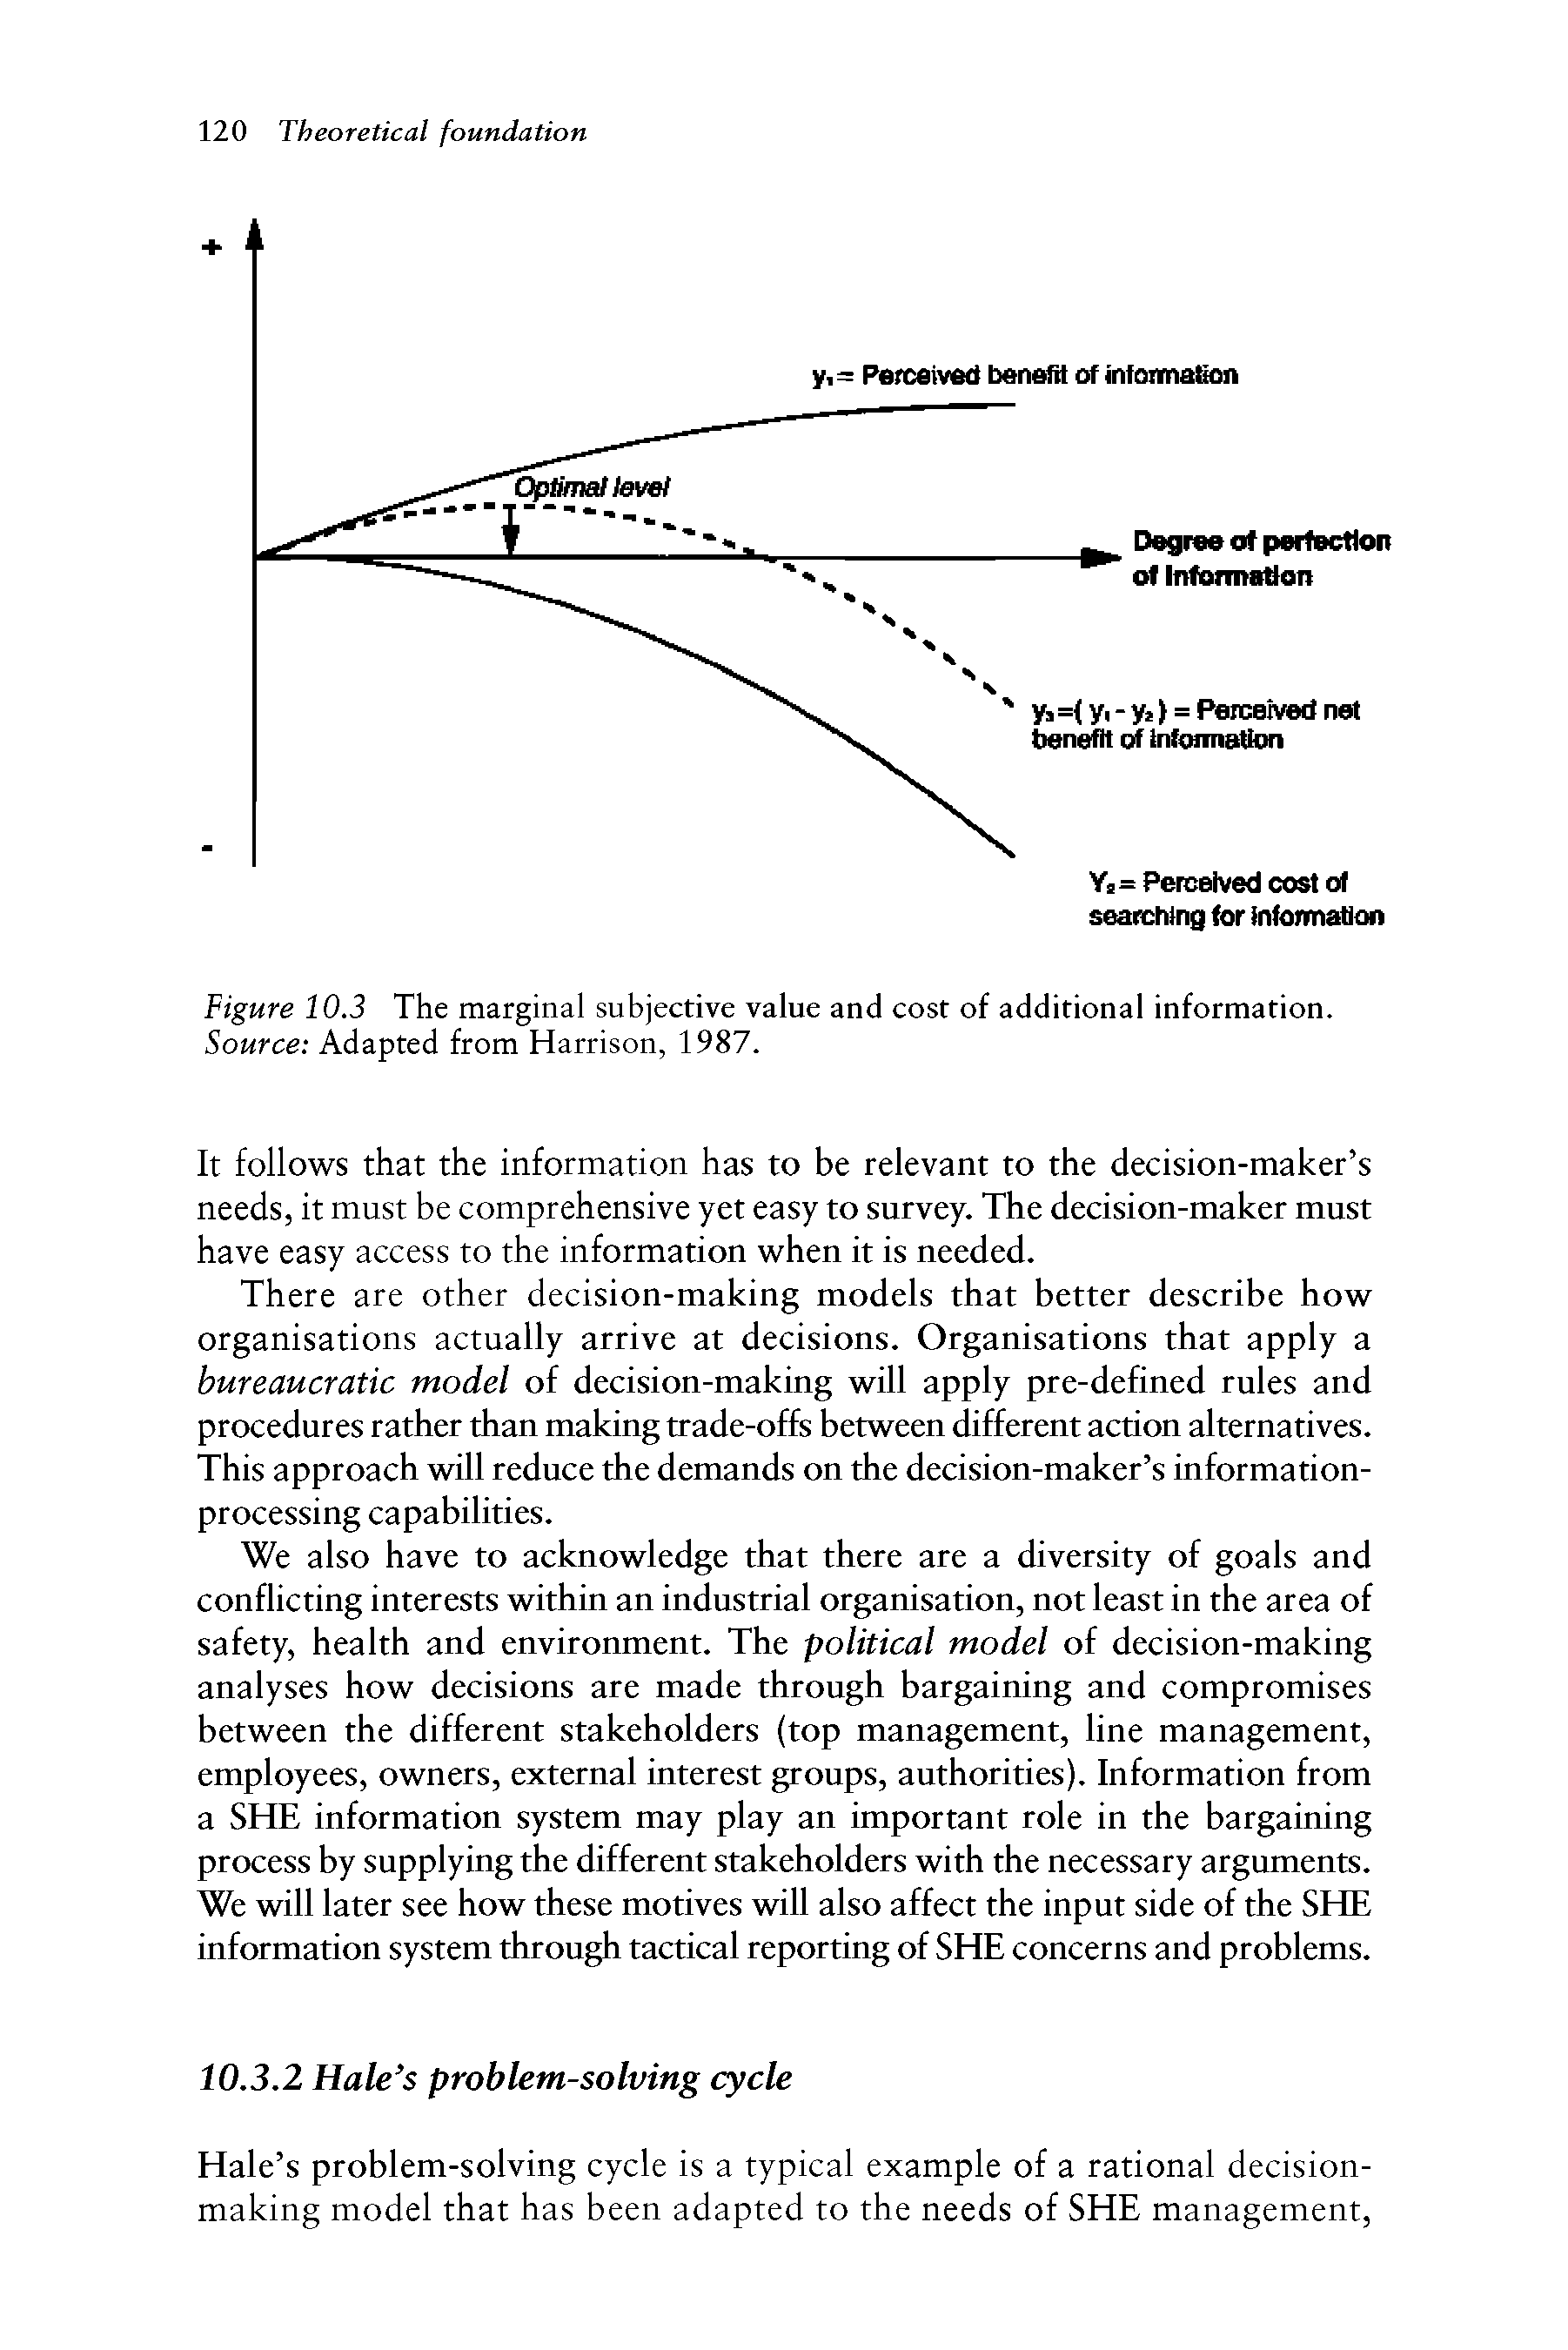 Figure 10.3 The marginal subjective value and cost of additional information. Source Adapted from Harrison, 1987.